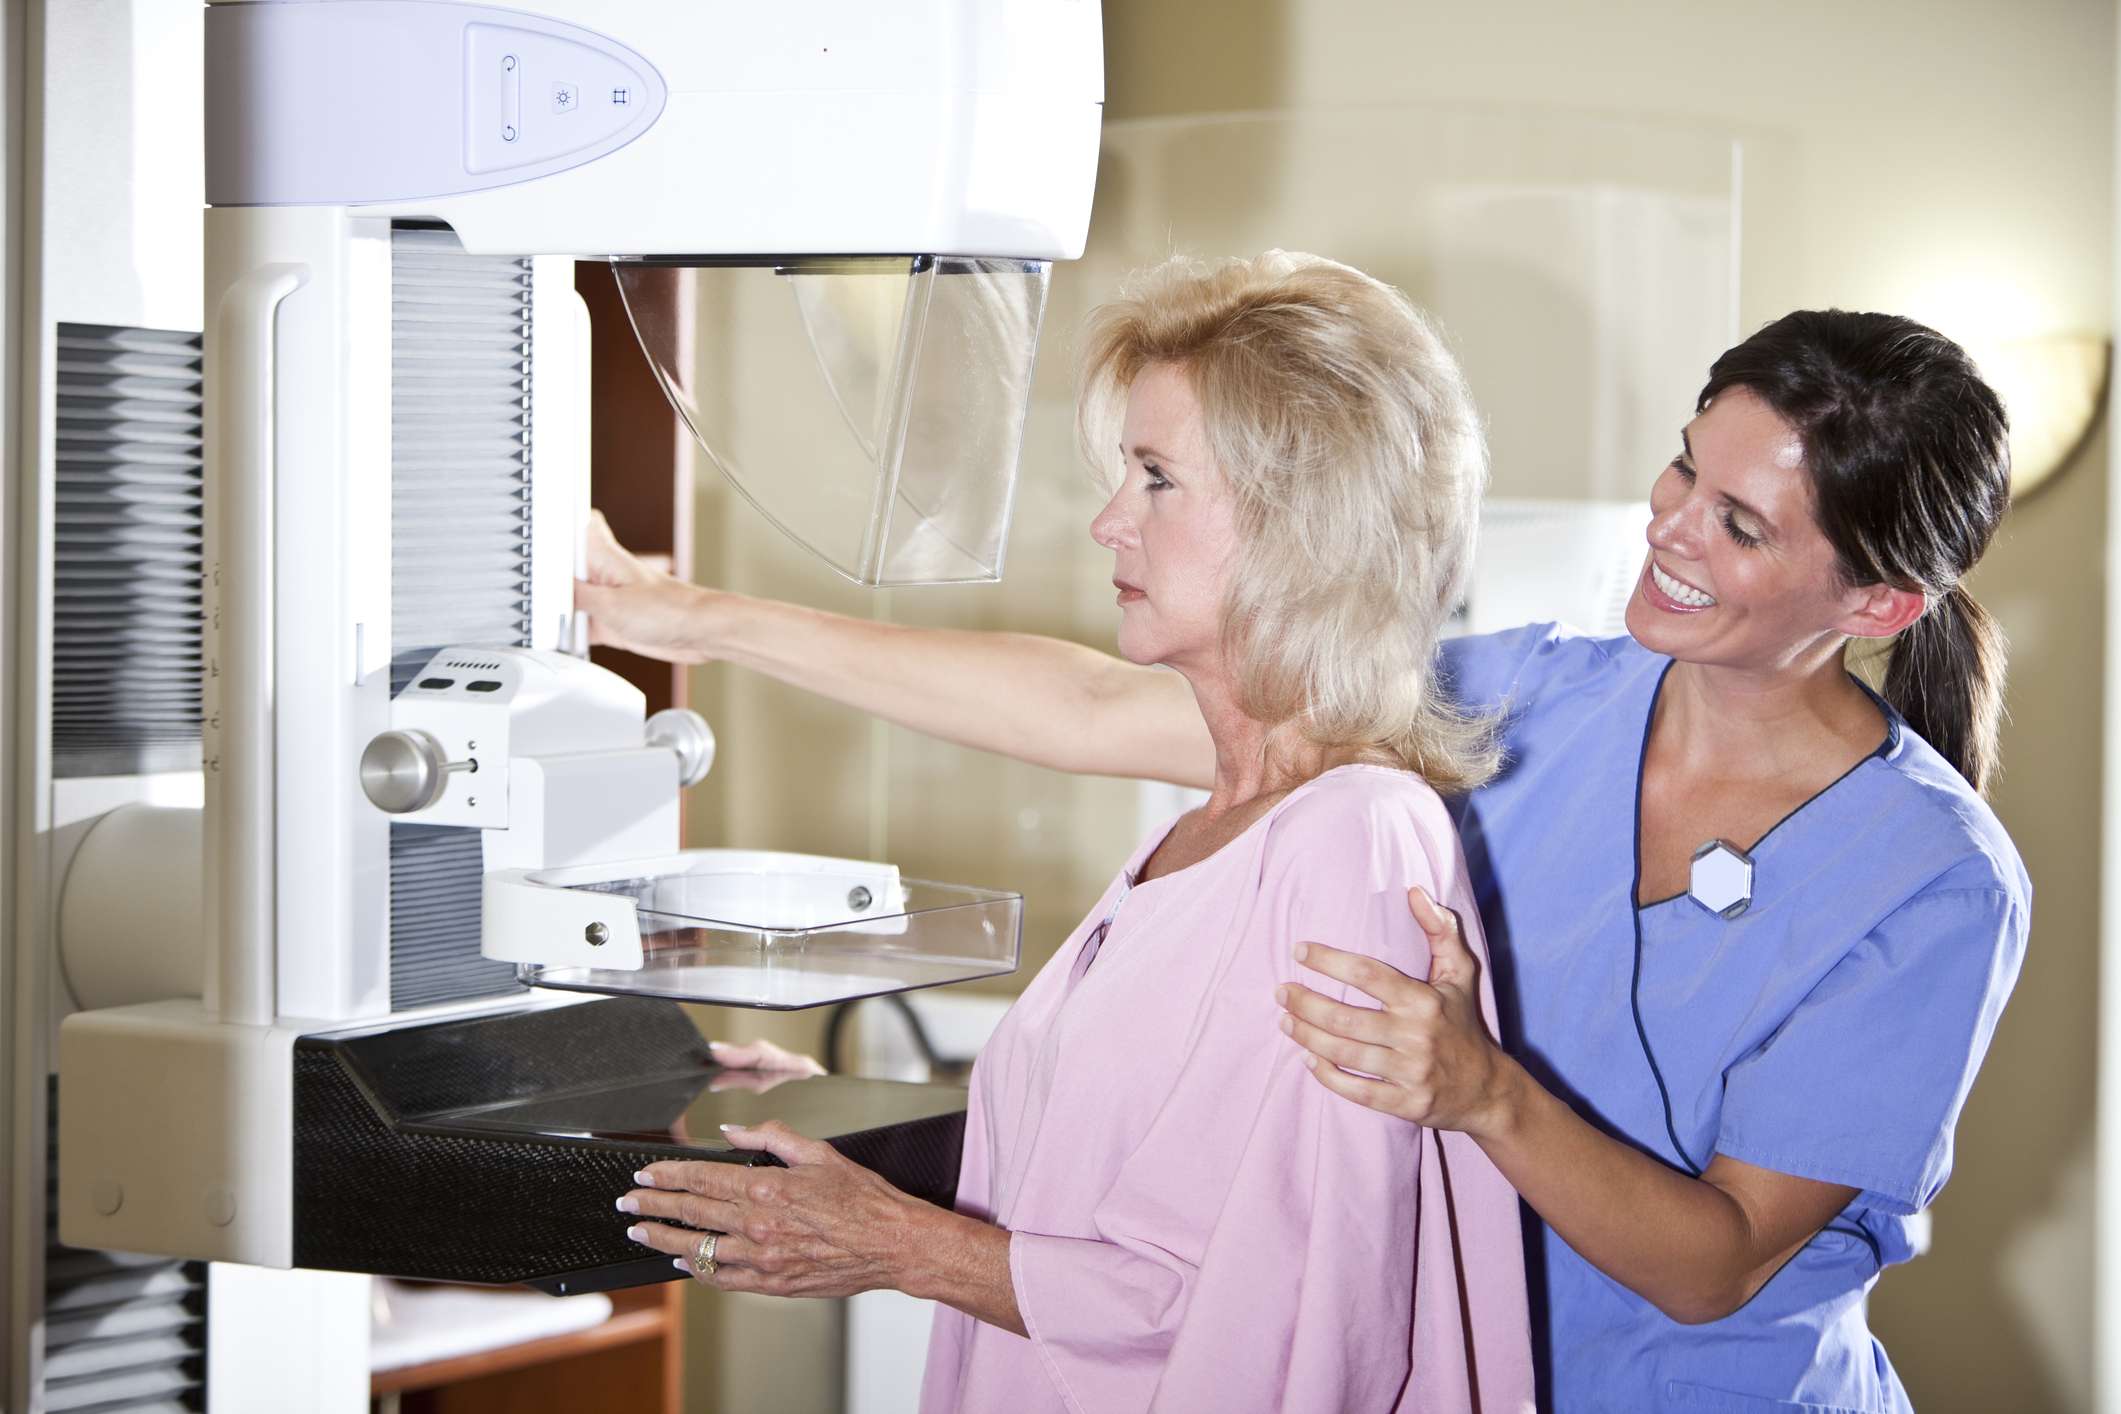 Why the Latest Advice About Mammograms May Not Be for You â Health ...